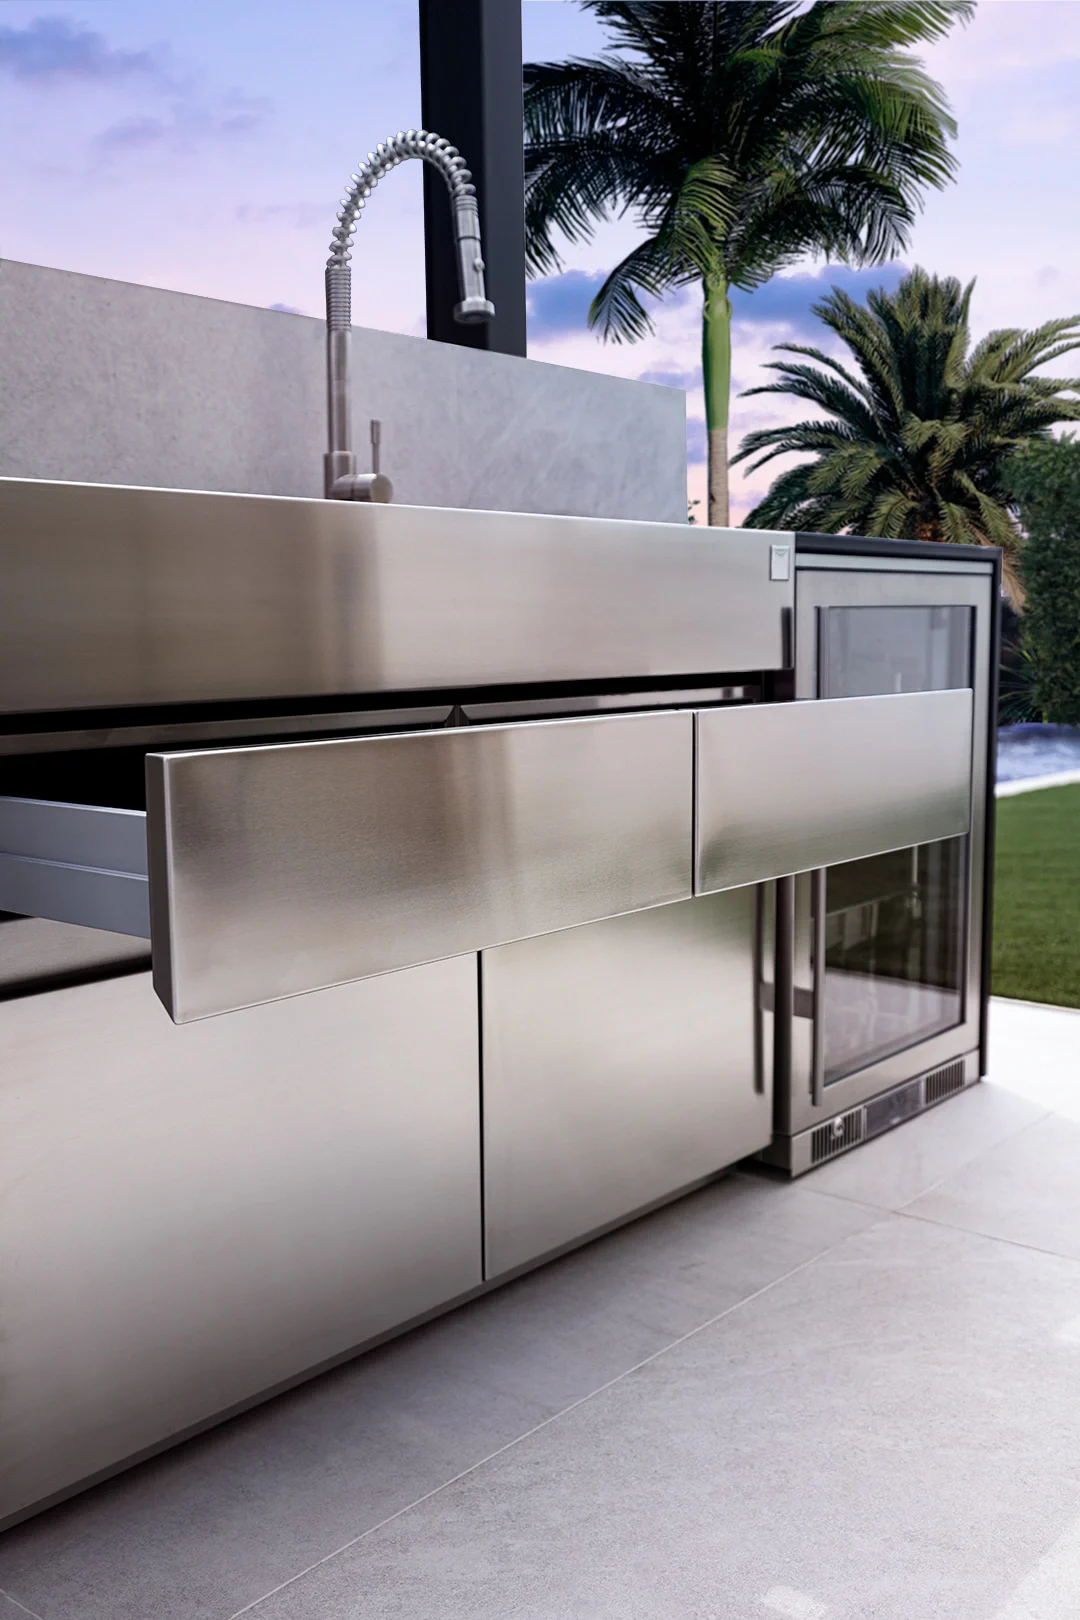 stainless steel outdoor kitchens